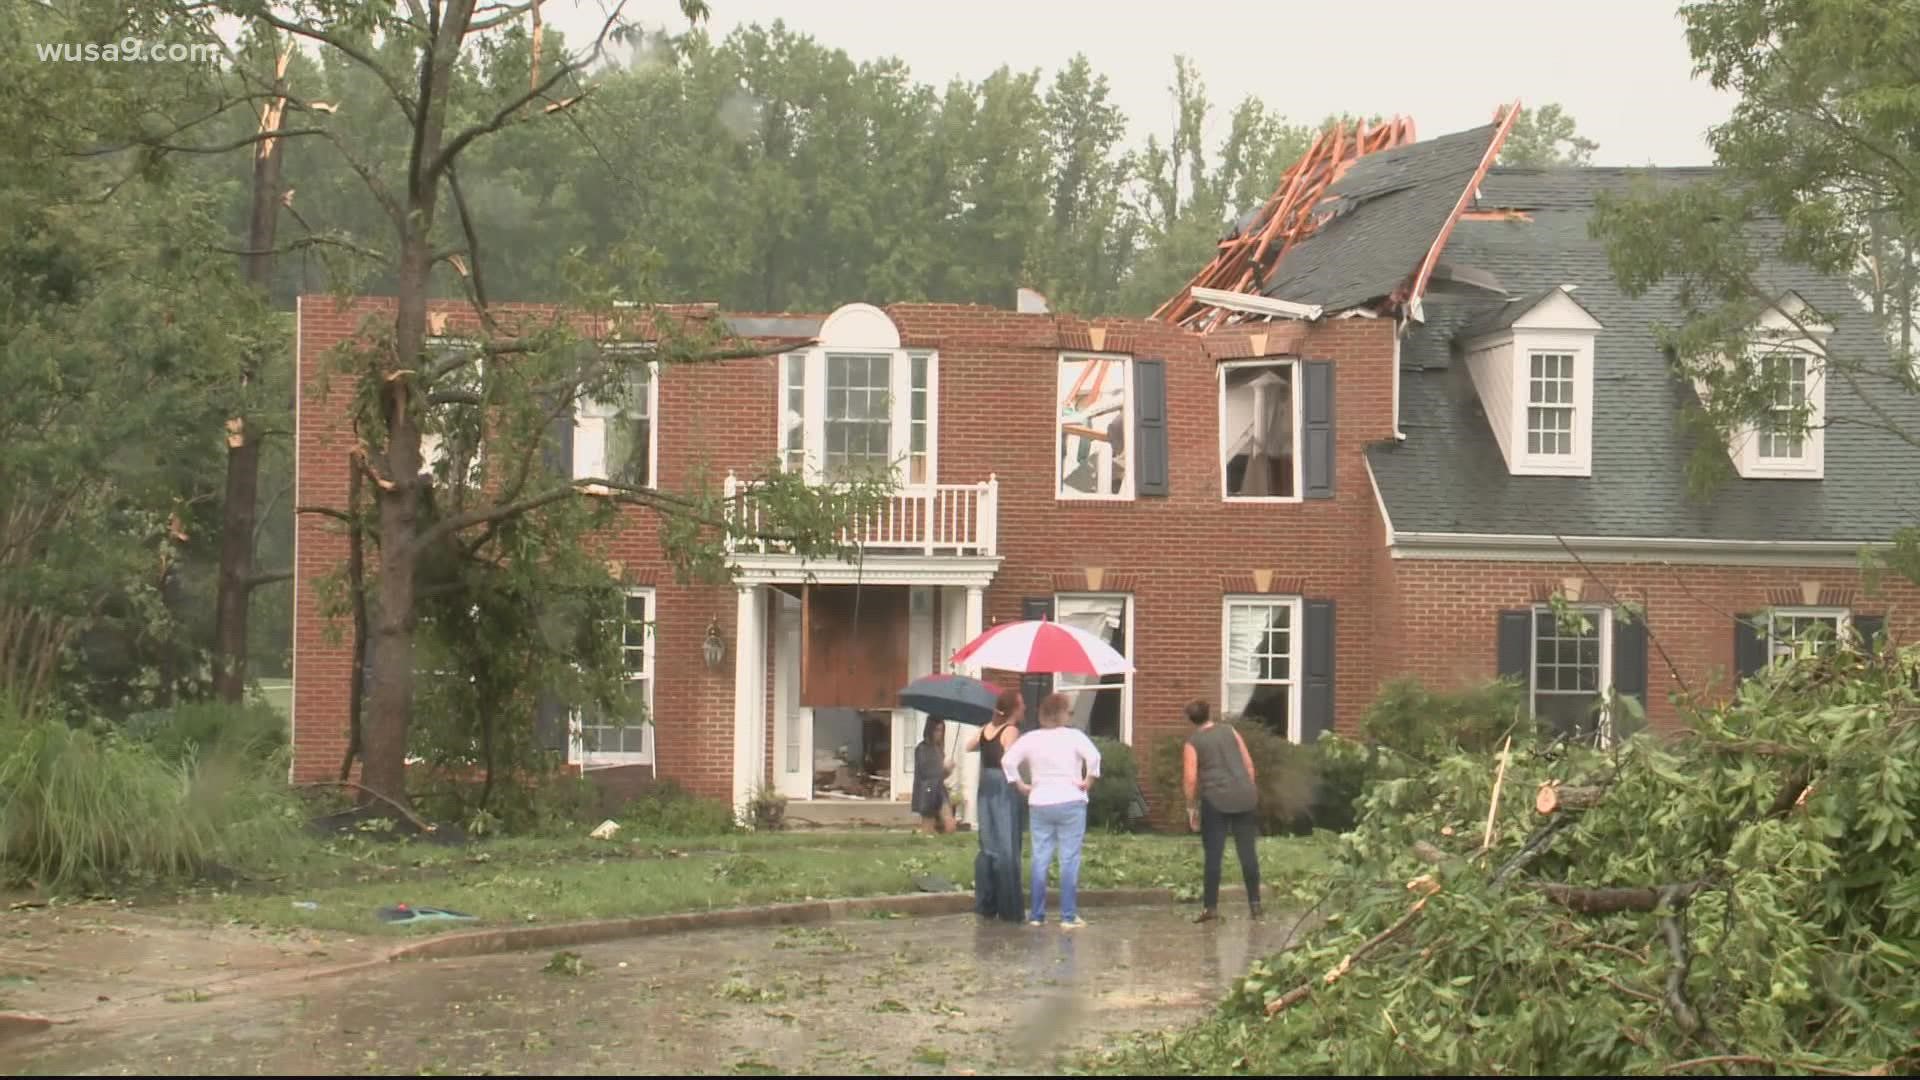 Wind blows the roof off Maryland home after tornado touches down